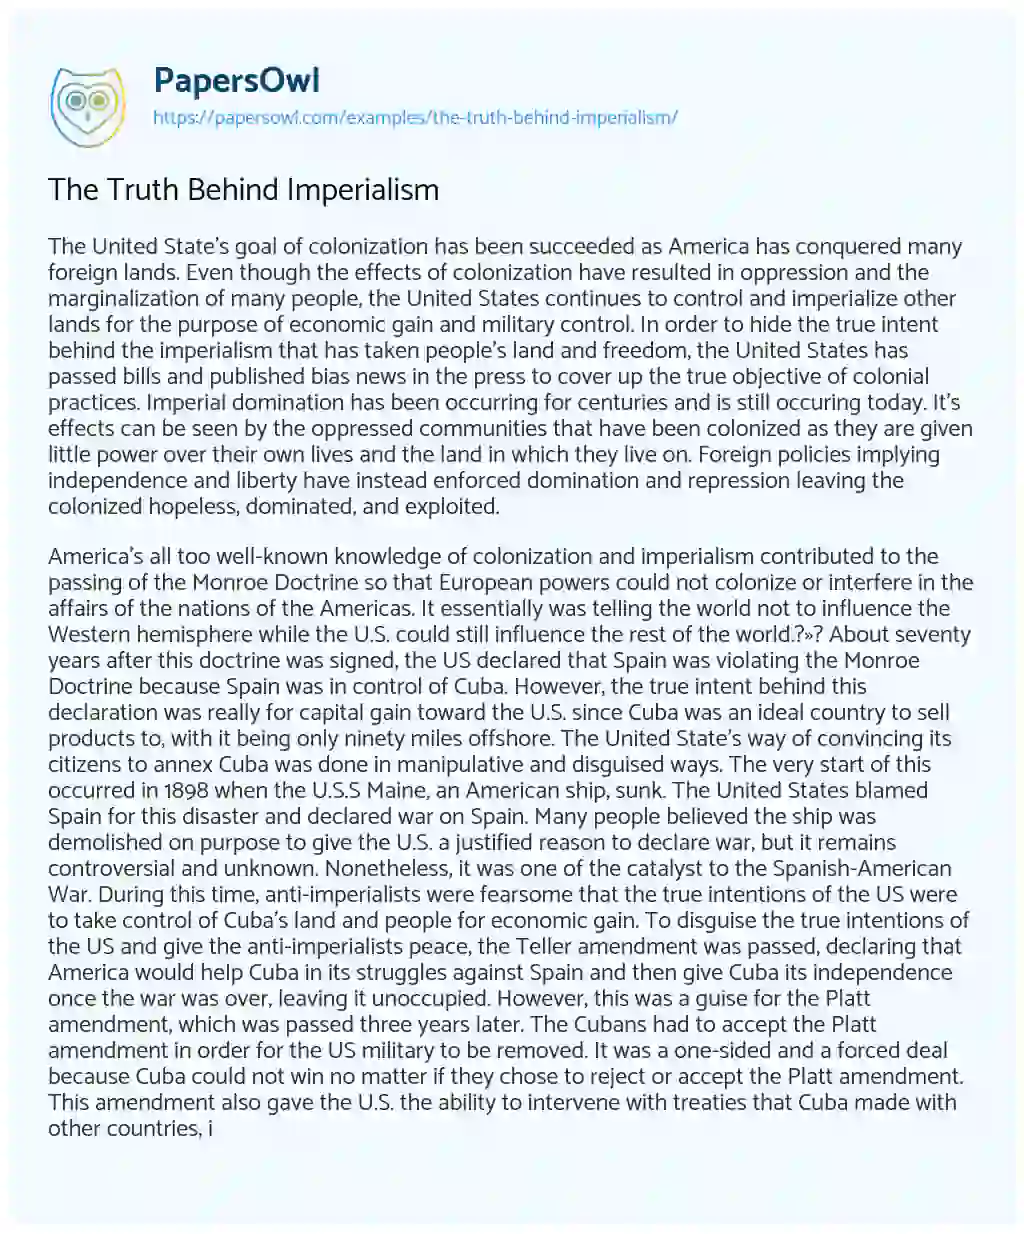 Essay on The Truth Behind Imperialism